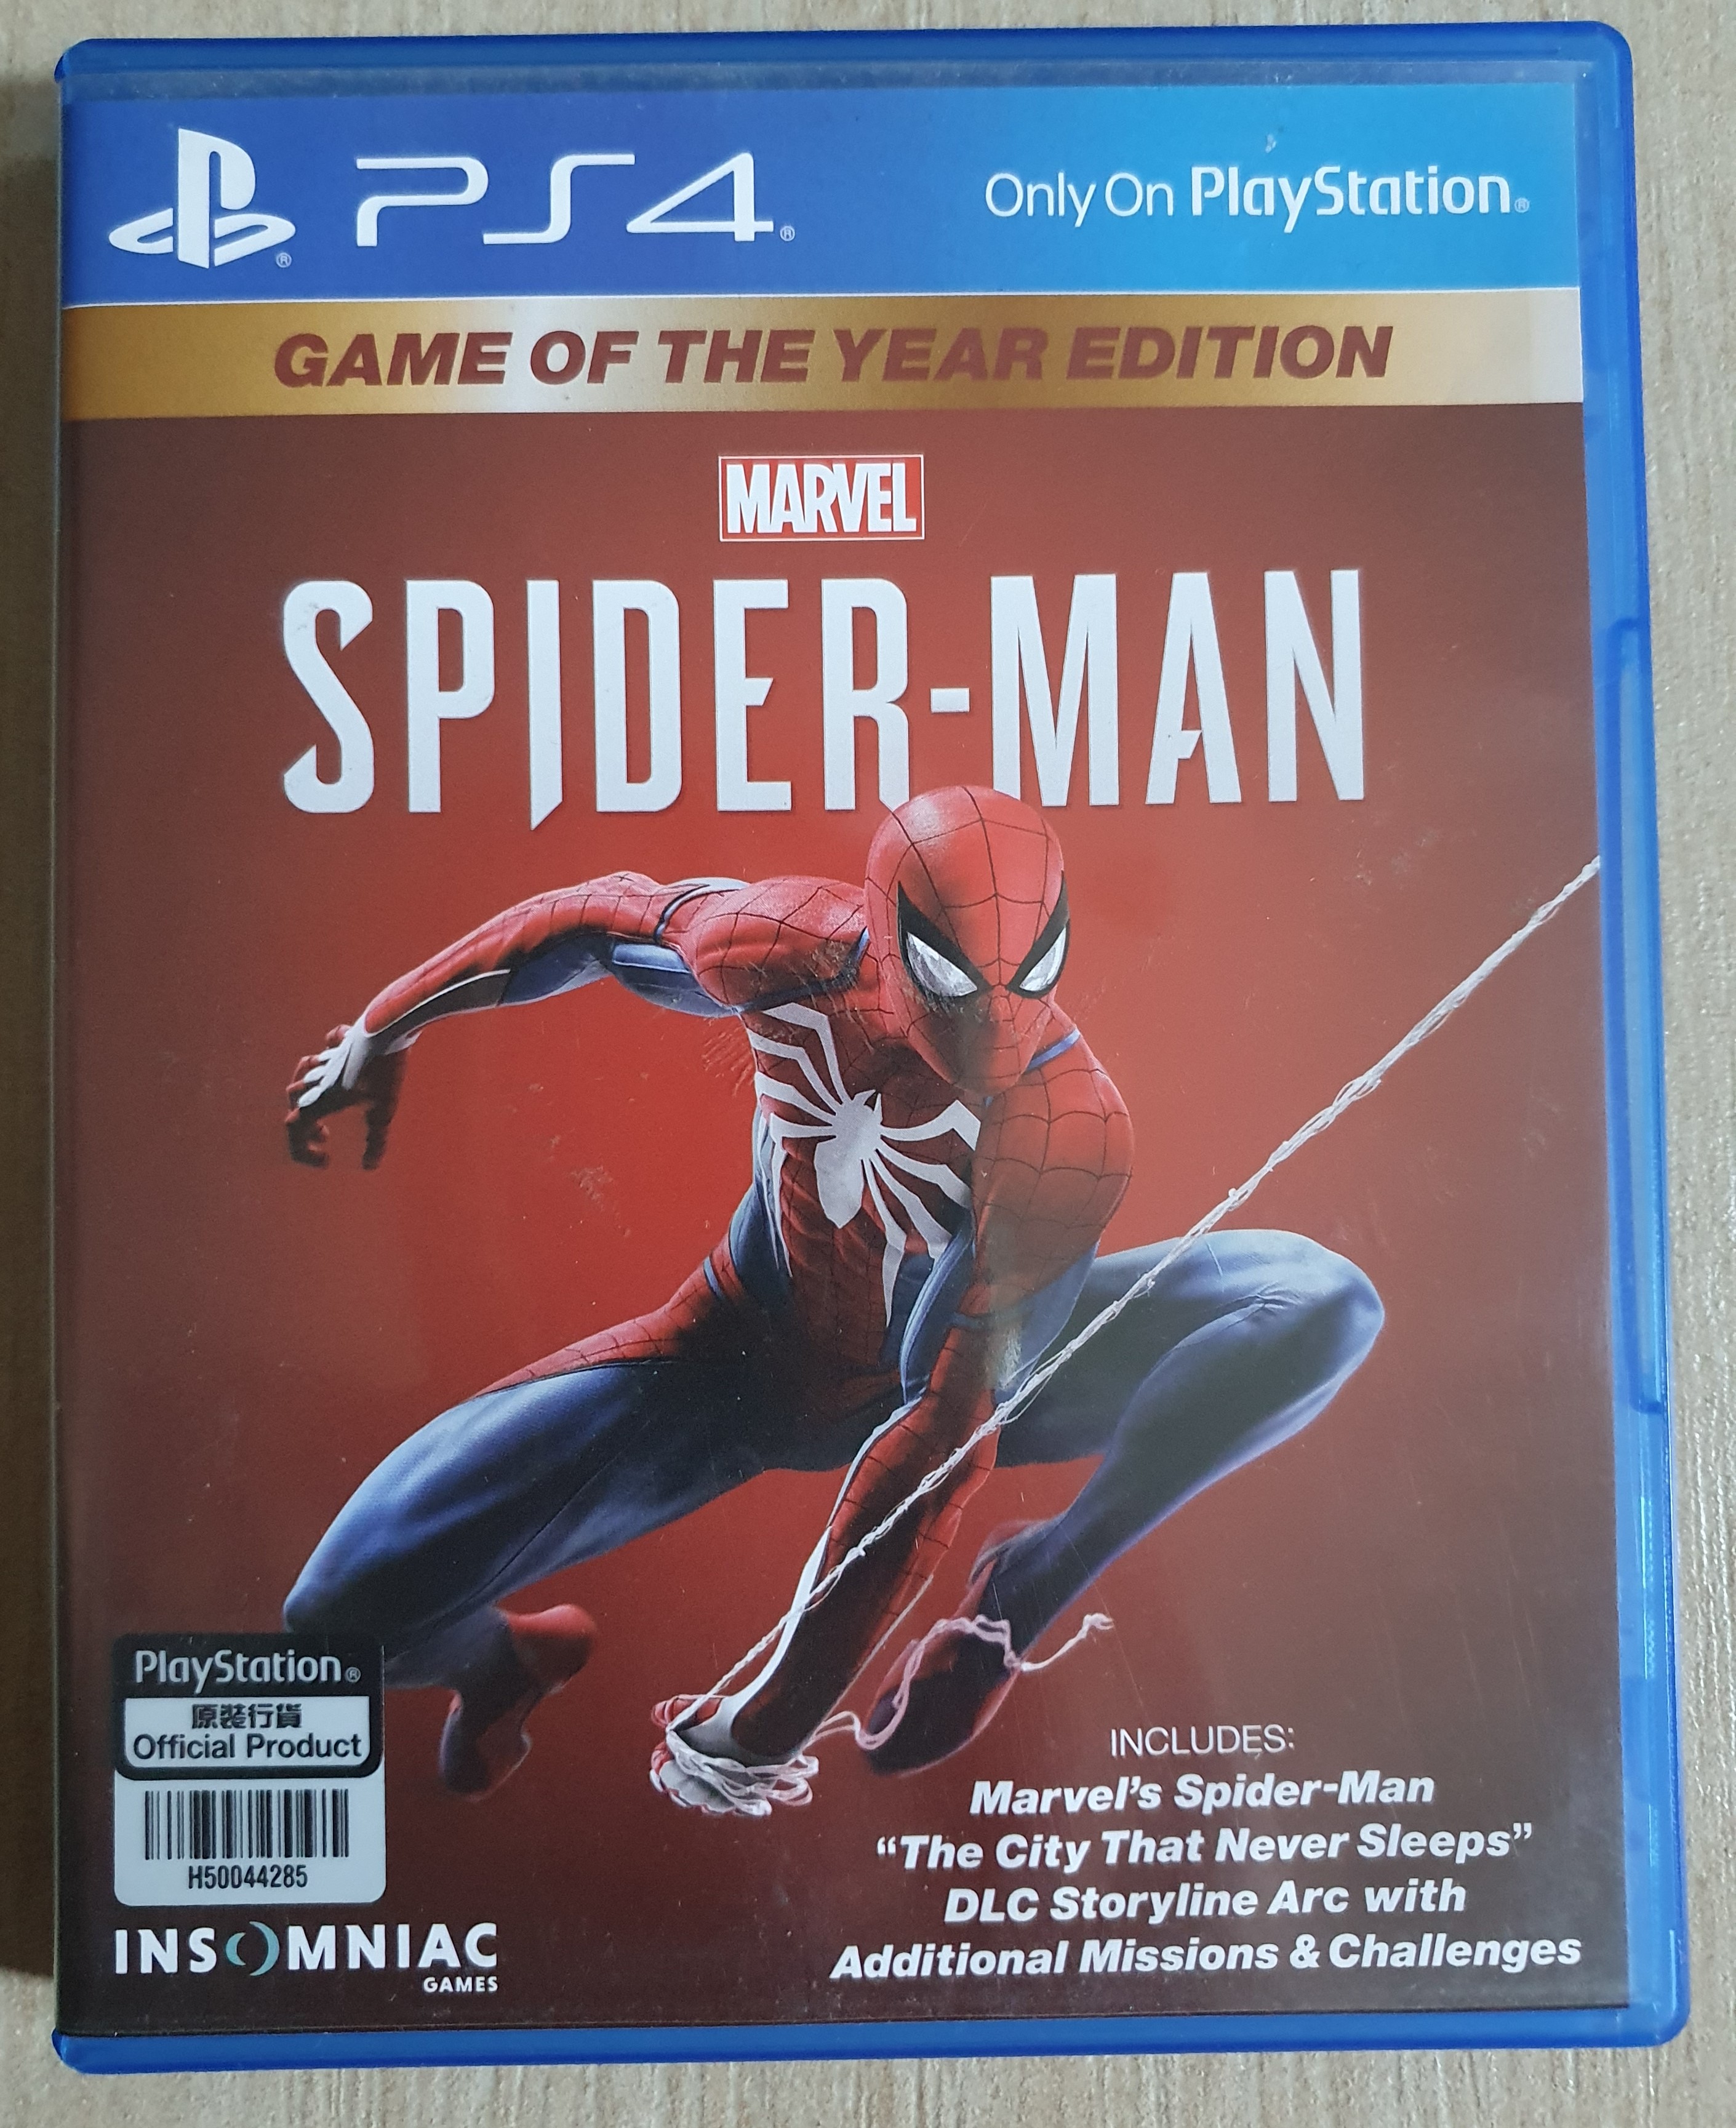  Marvel's Spider-Man Game Of The Year Edition (PS4